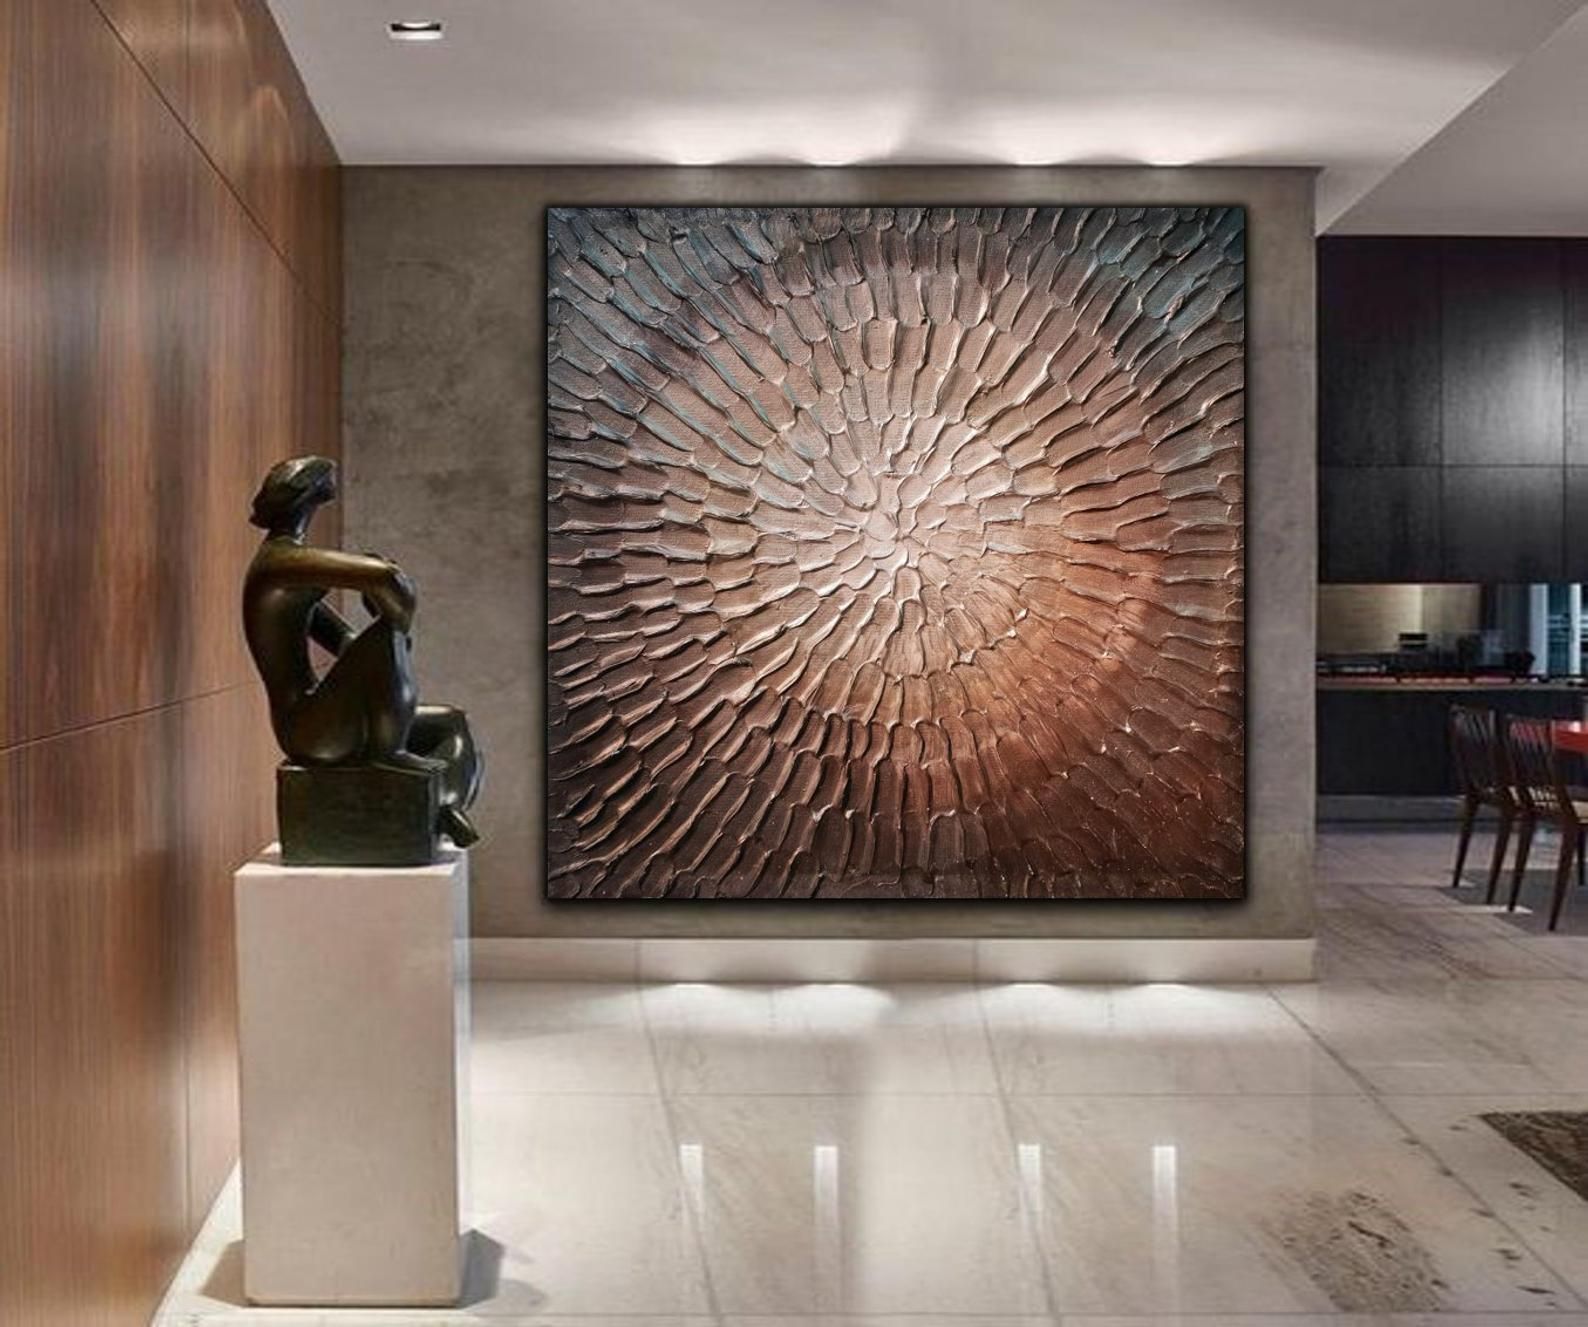 Original Modern Heavy Texture Carved Sculpture Floral Browns Shades Intended For Current Textured Metallic Wall Art (View 4 of 20)